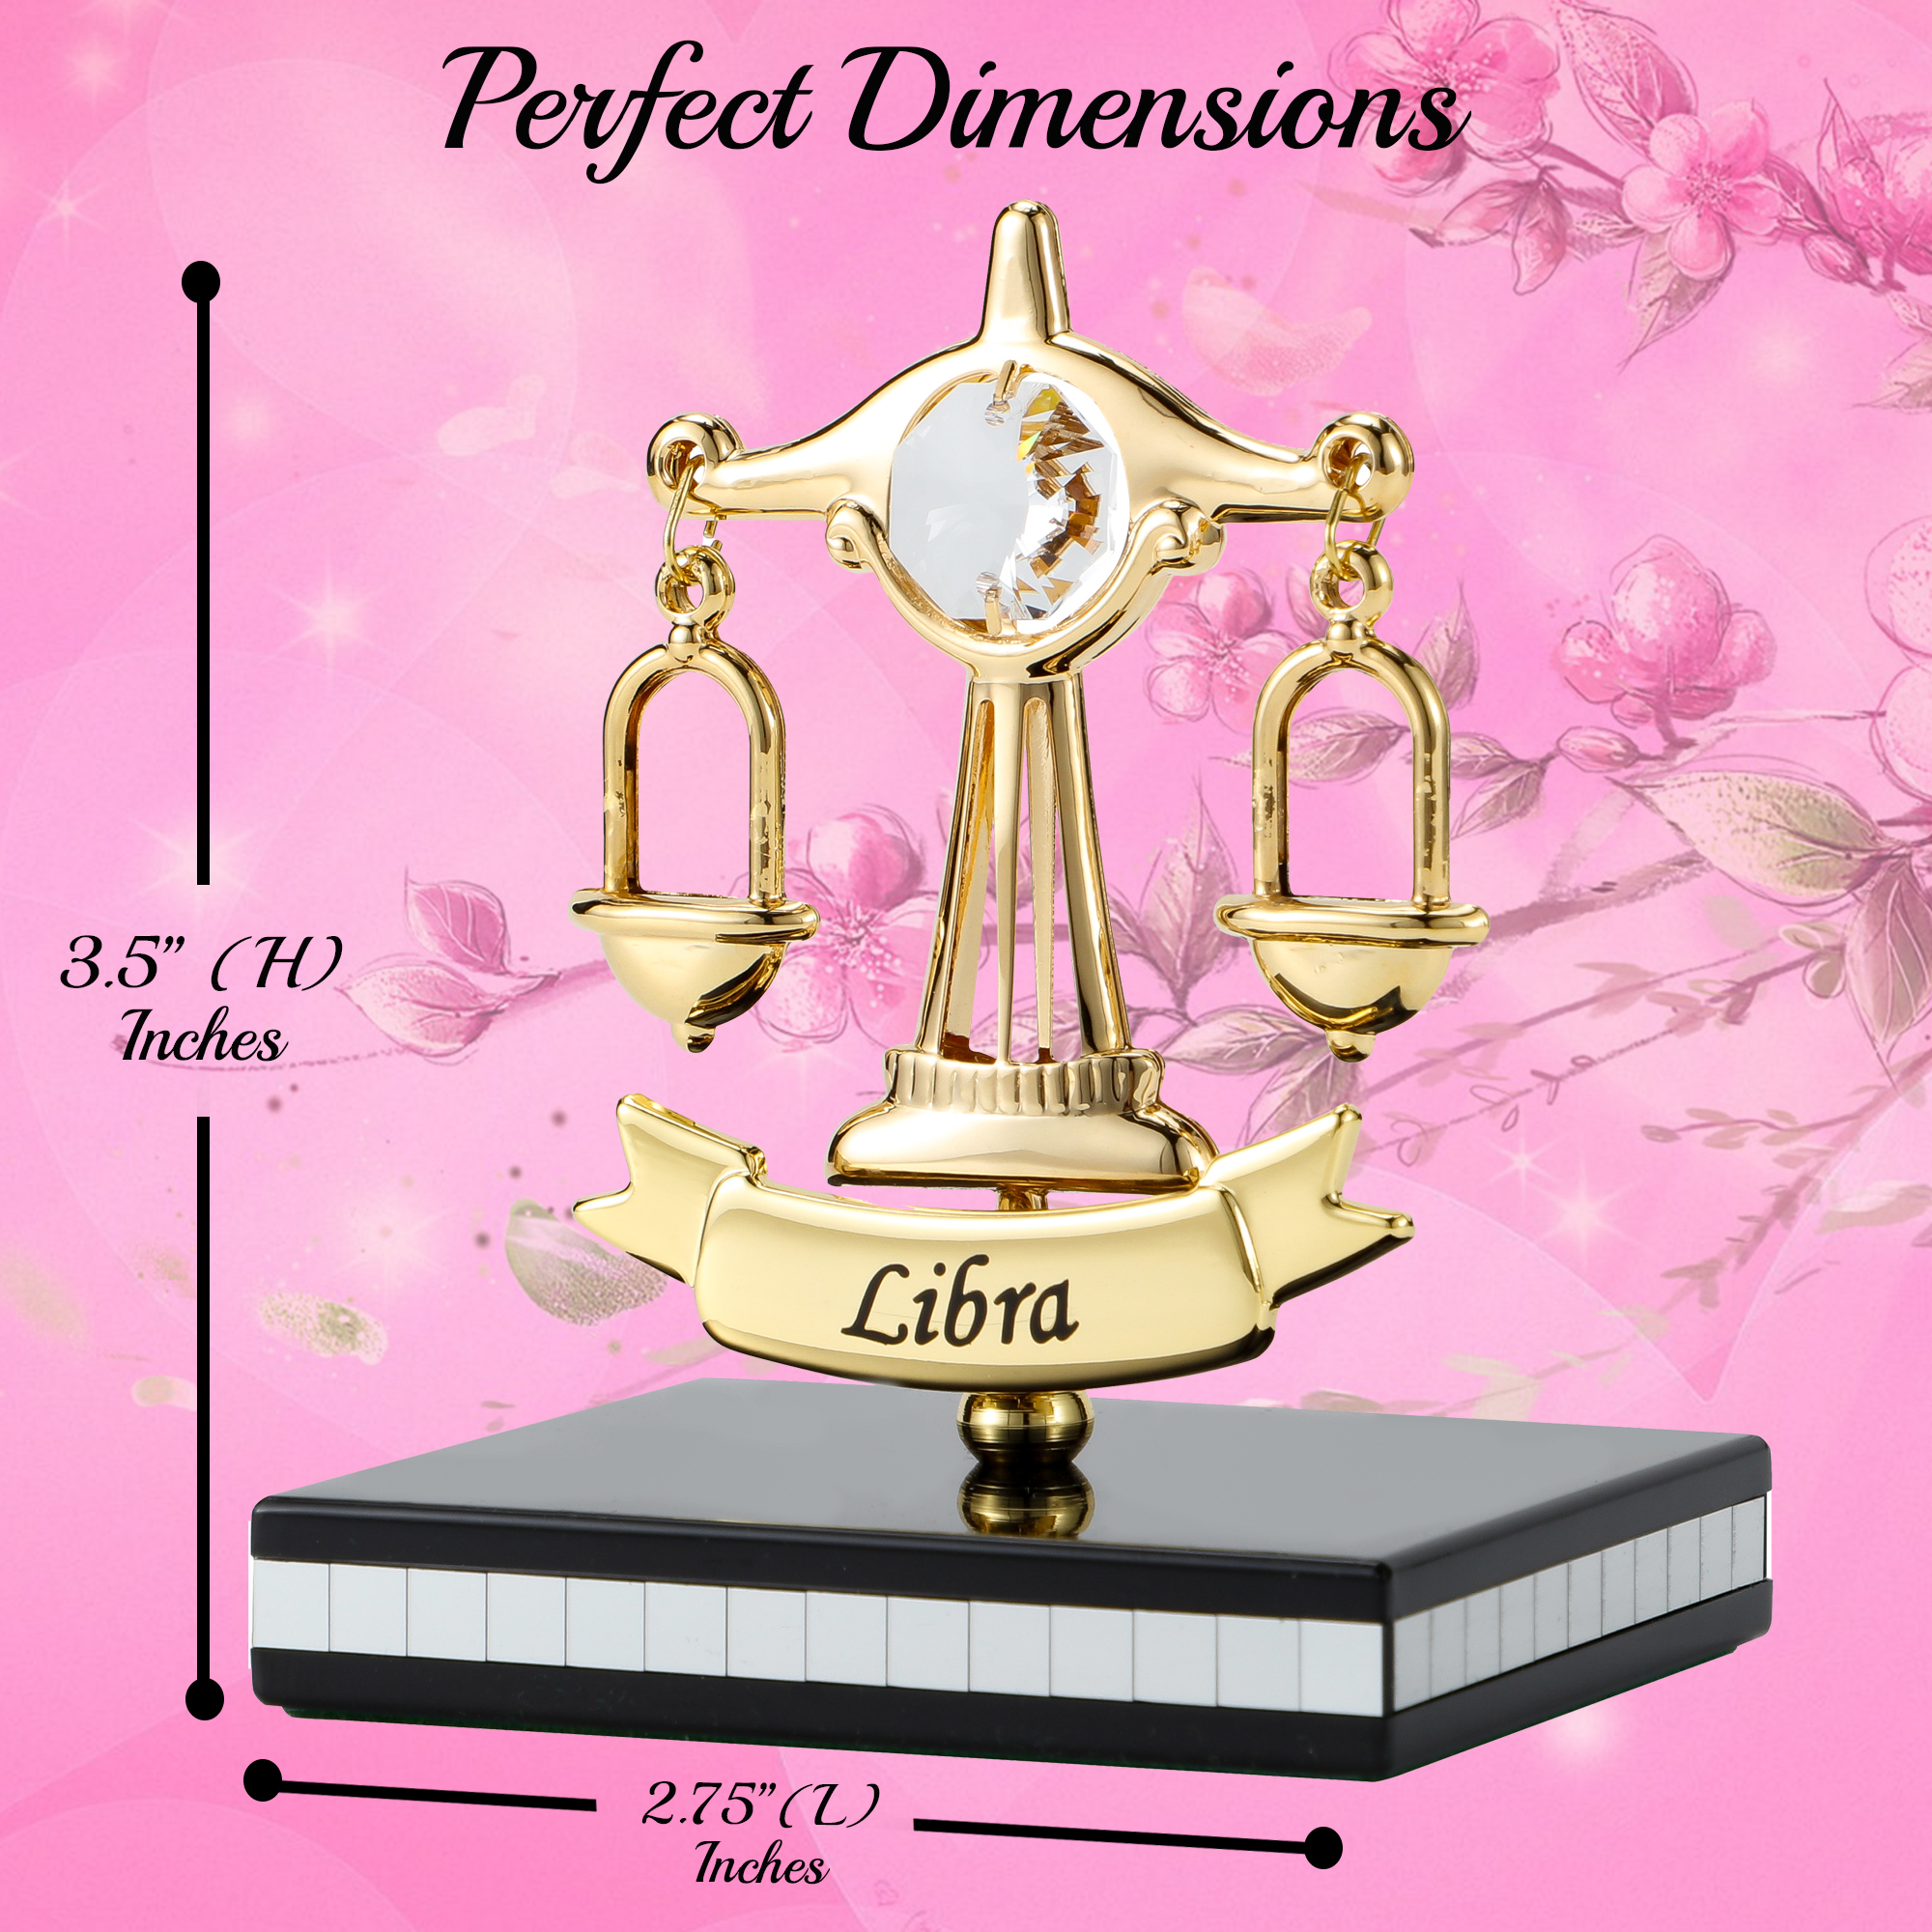 Matashi 24K Gold Plated Zodiac Astrological Sign Libra Figurine Statuette On Stand Studded With Matashi Crystals